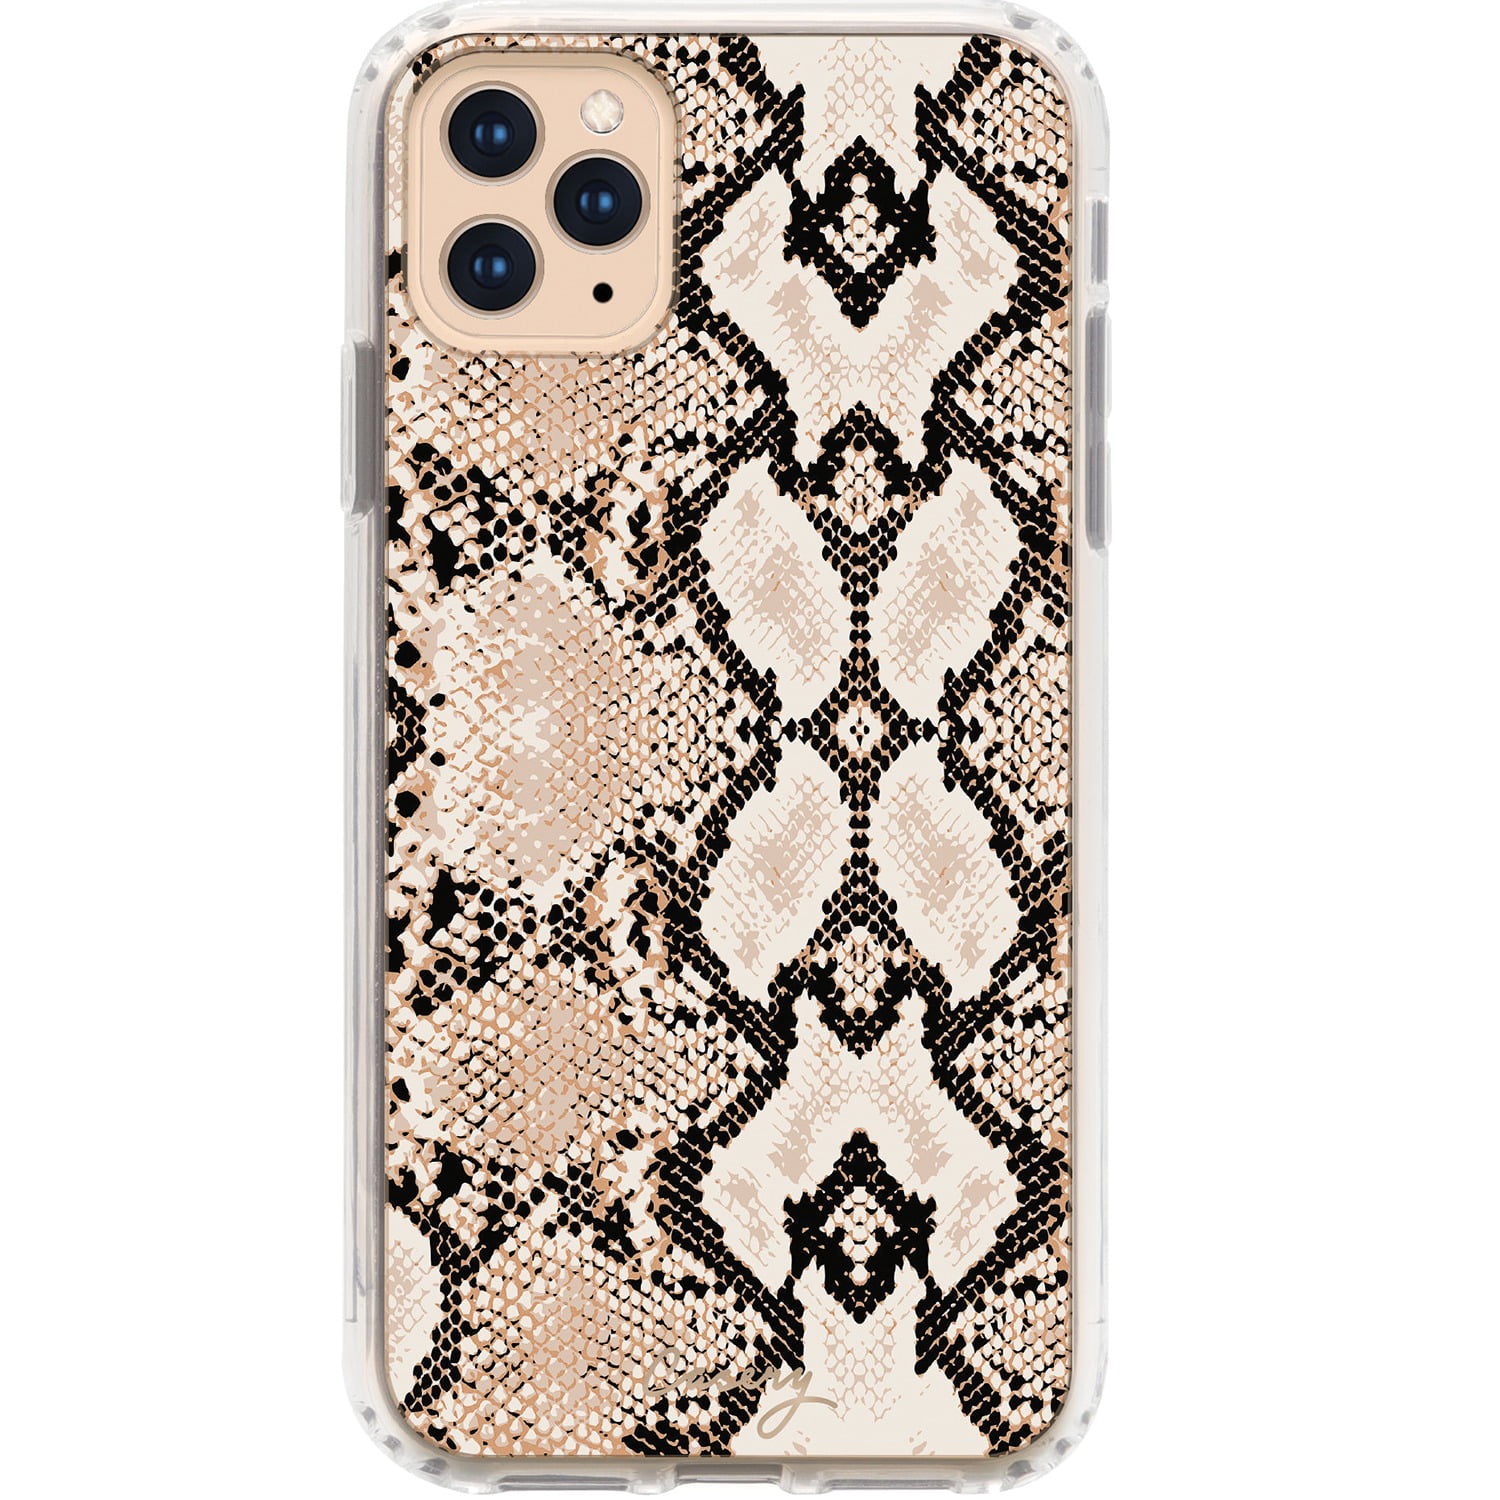 Snakeskin iPhone XR Case Animal Prints iPhone X Case Birthday Gift for Her iPhone XS Case Snake Print iPhone 8 Silicone Case iPhone 6S Cover